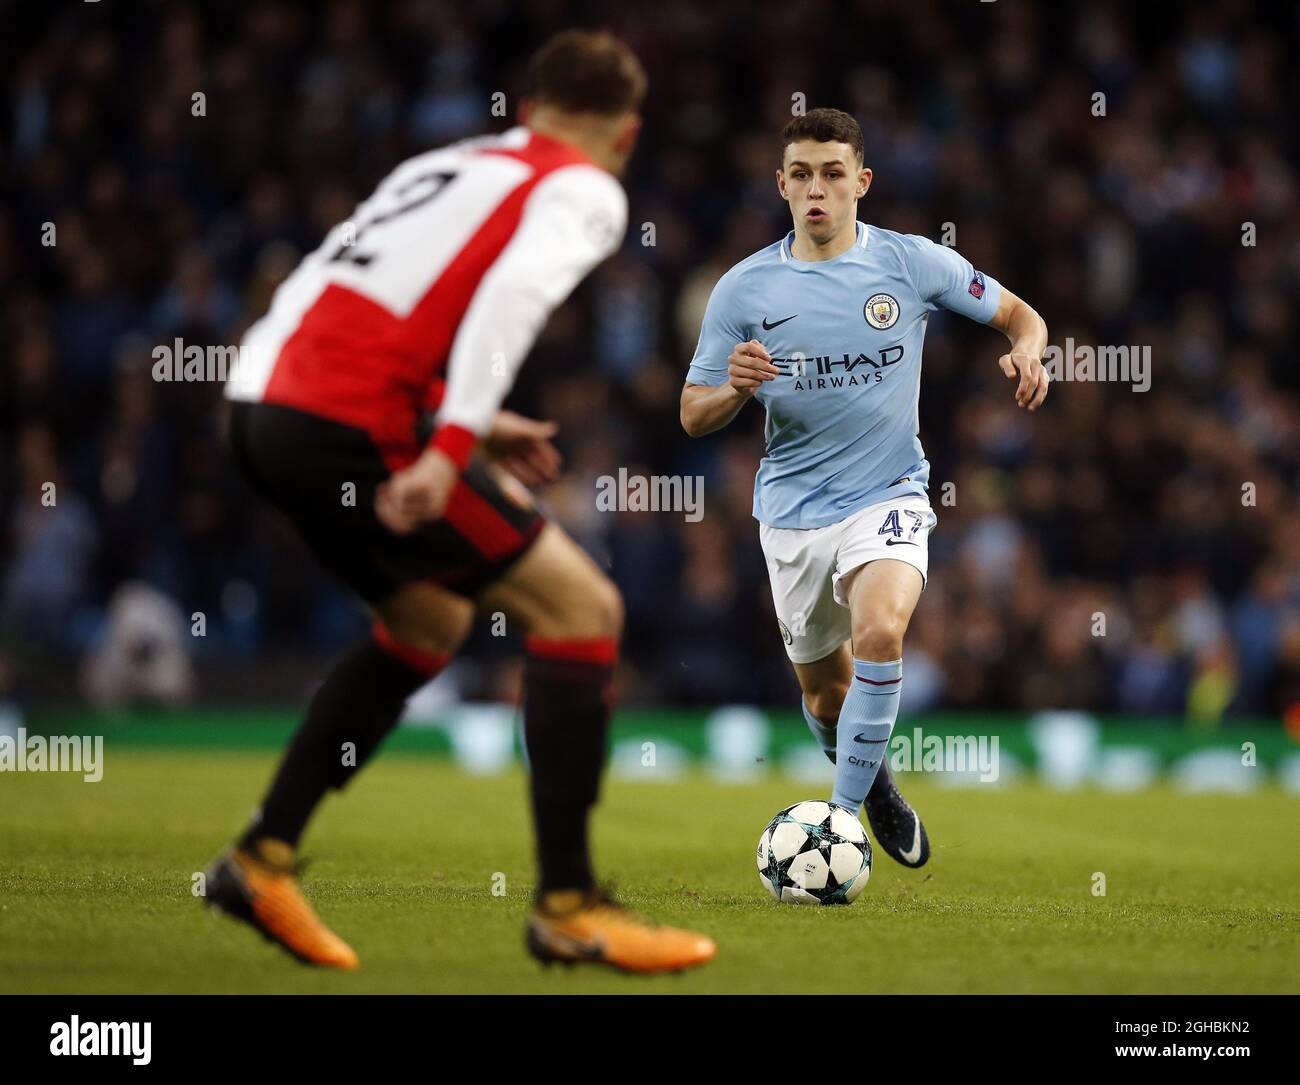 Manchester City's Phil Foden in action during the champions league match at the Etihad Stadium, Manchester. Picture date: 21st November 2017. Picture credit should read: Andrew Yates/Sportimage via PA Images Stock Photo